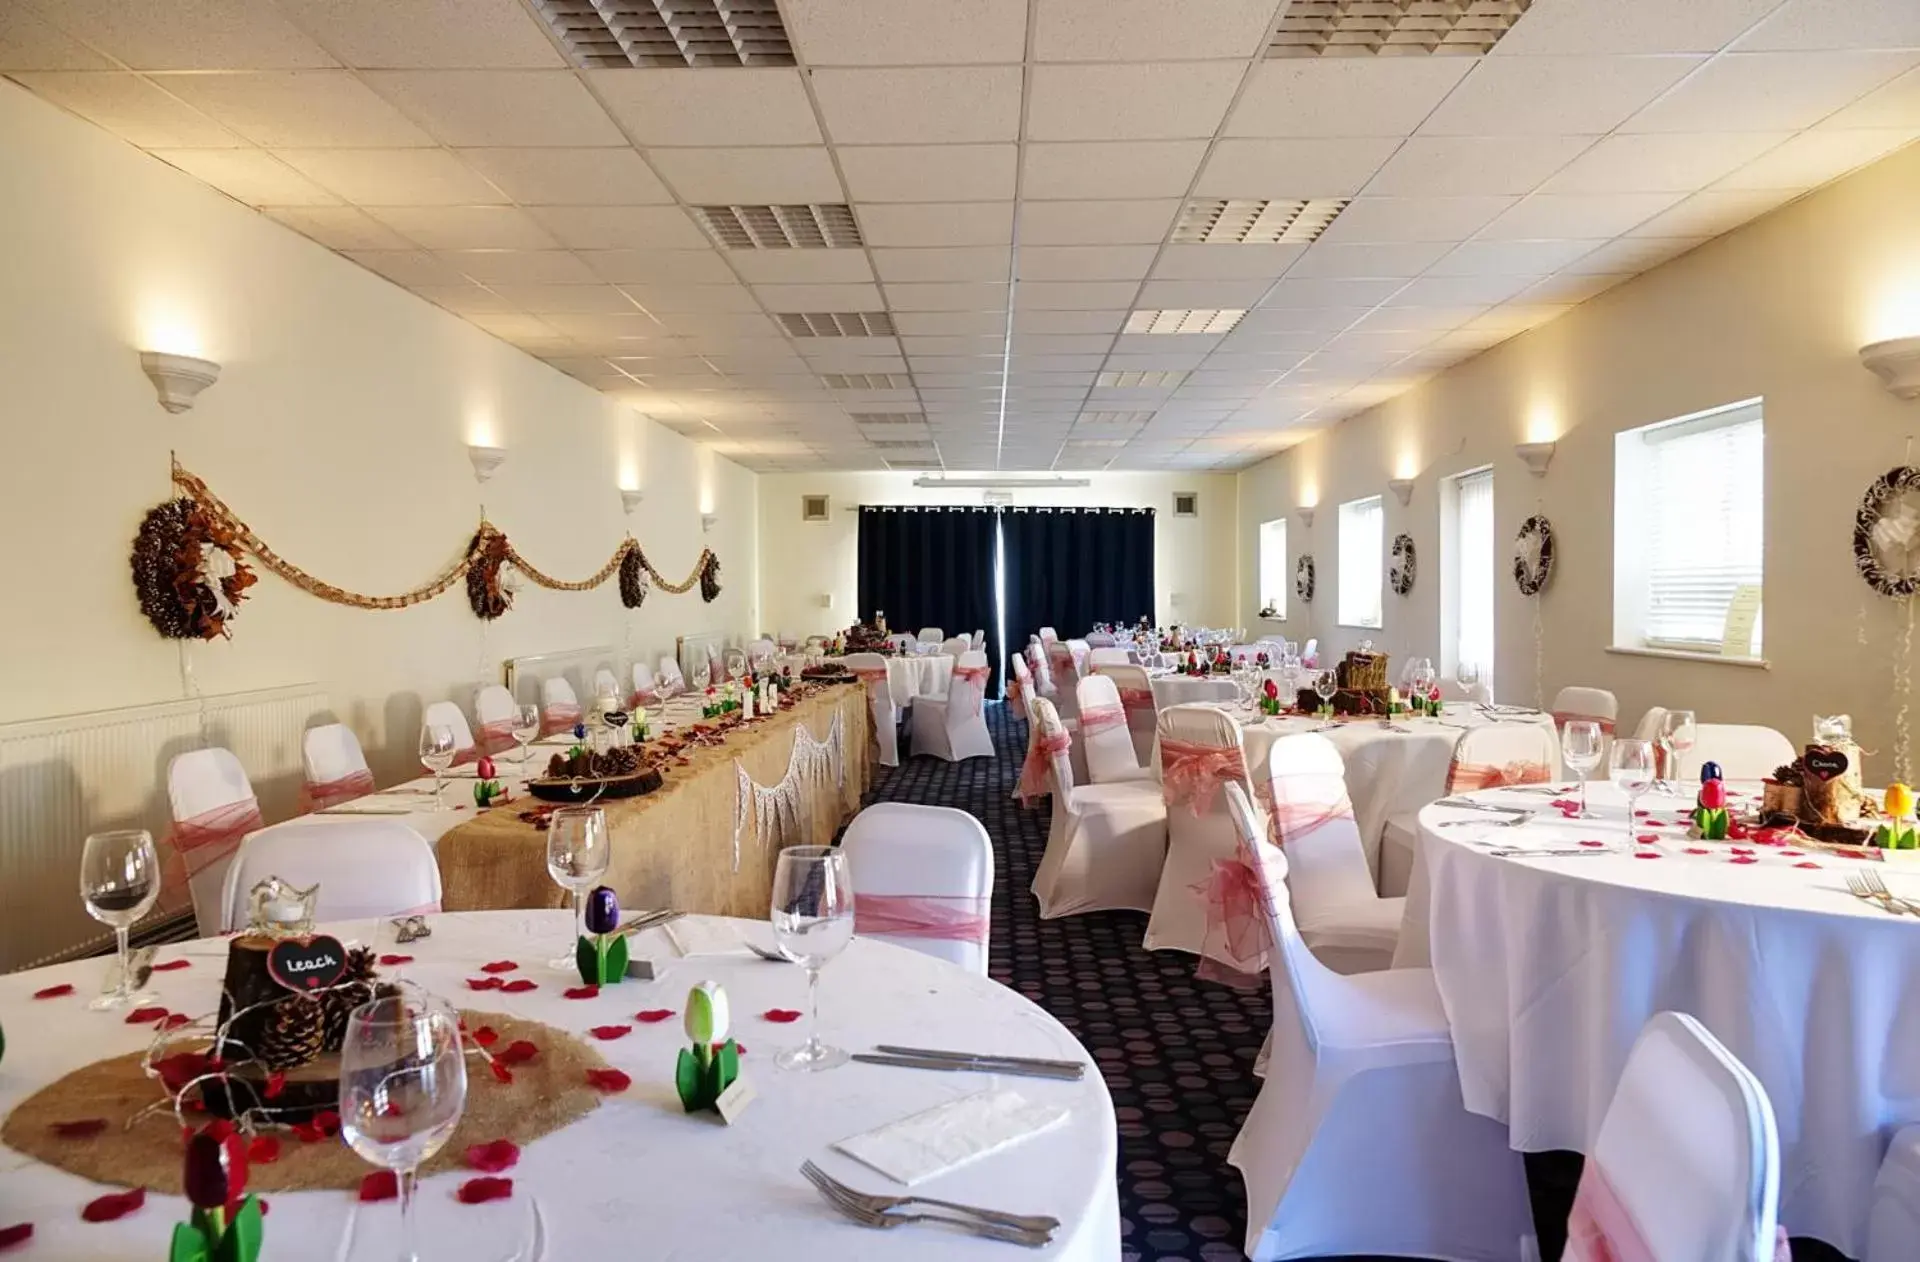 Banquet/Function facilities, Banquet Facilities in New Inn Hotel